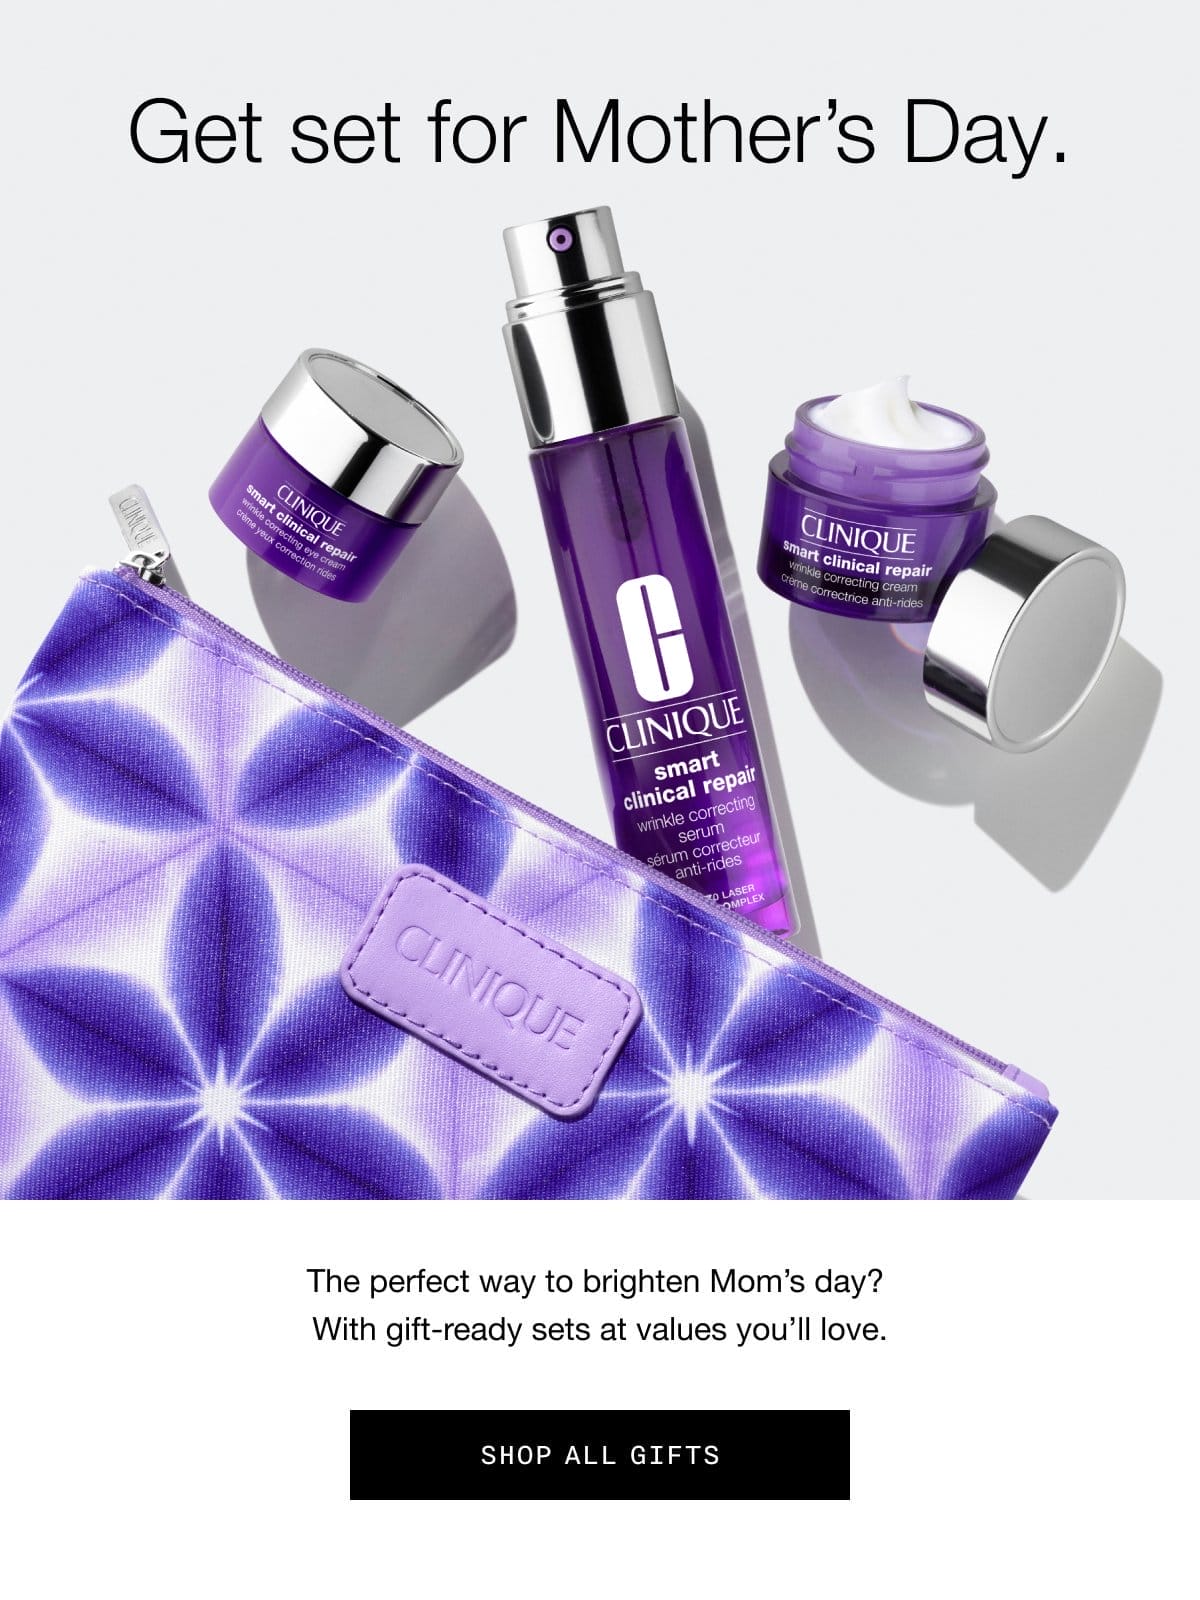 Get set for Mother’s Day. | The perfect way to brighten Mom’s day? With gift-ready sets at values you’ll love. SHOP ALL GIFTS